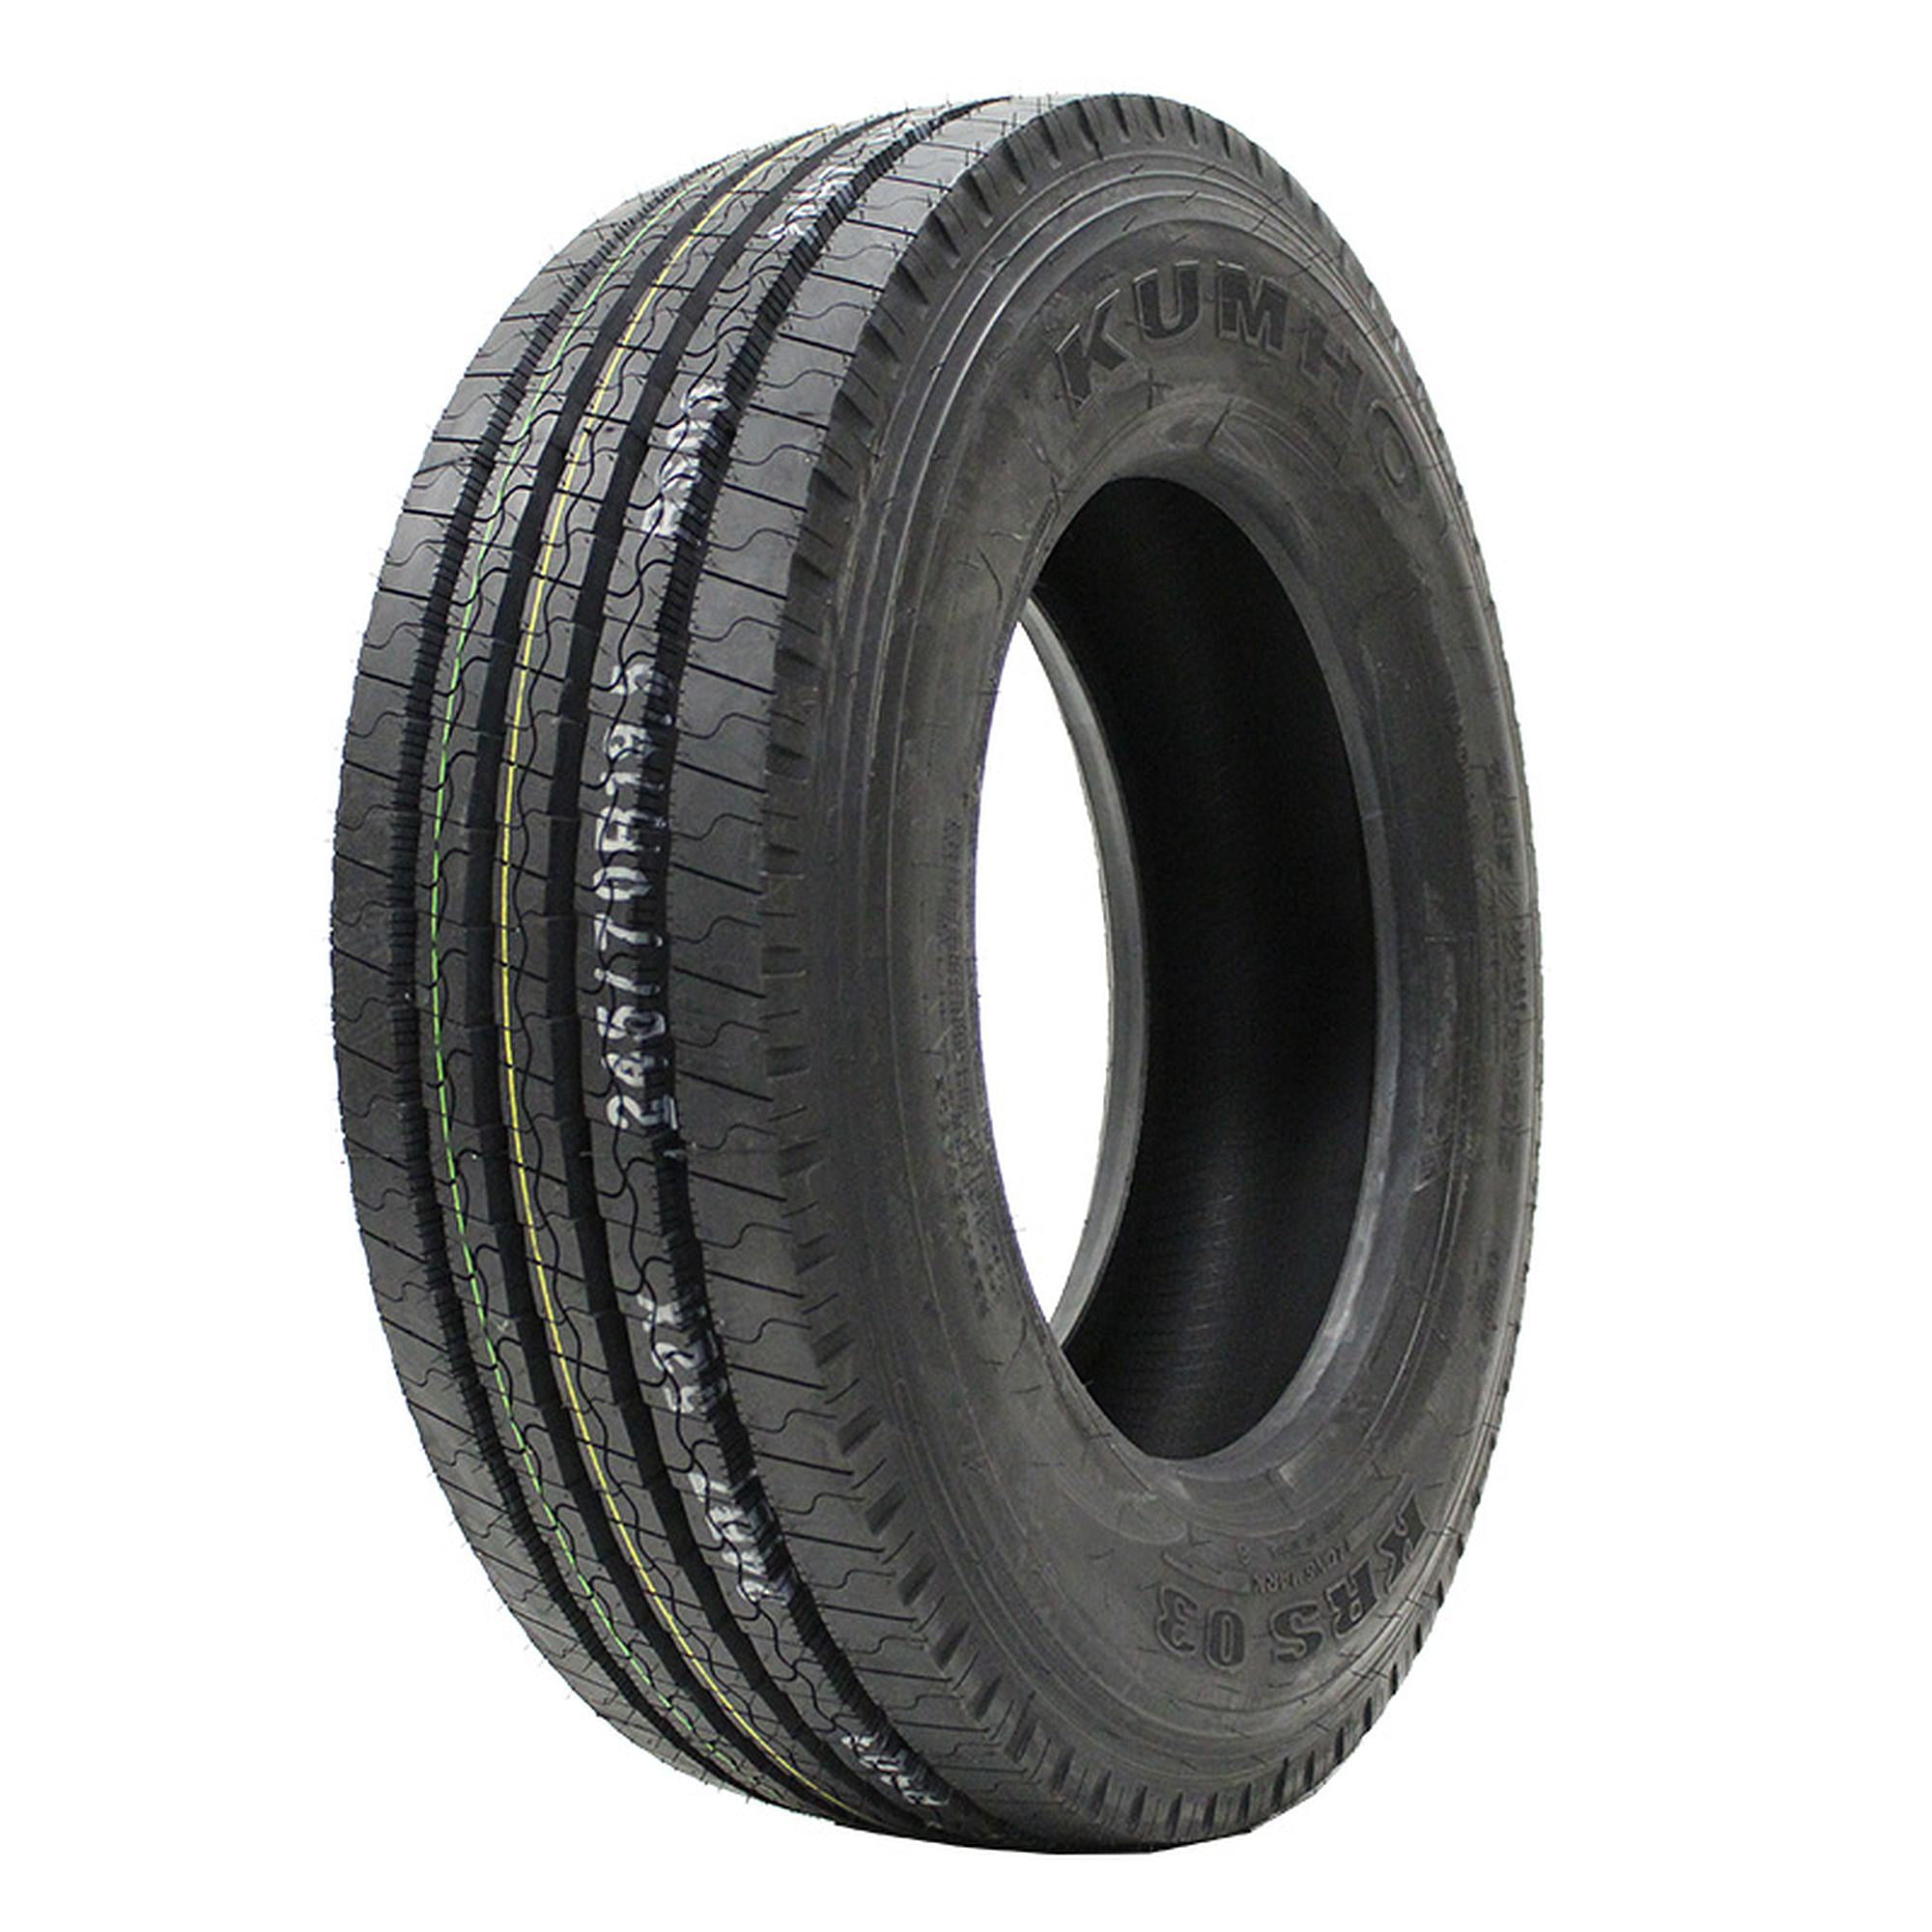 Kumho 135 245/70R19.5 KRS03 Tire Commercial